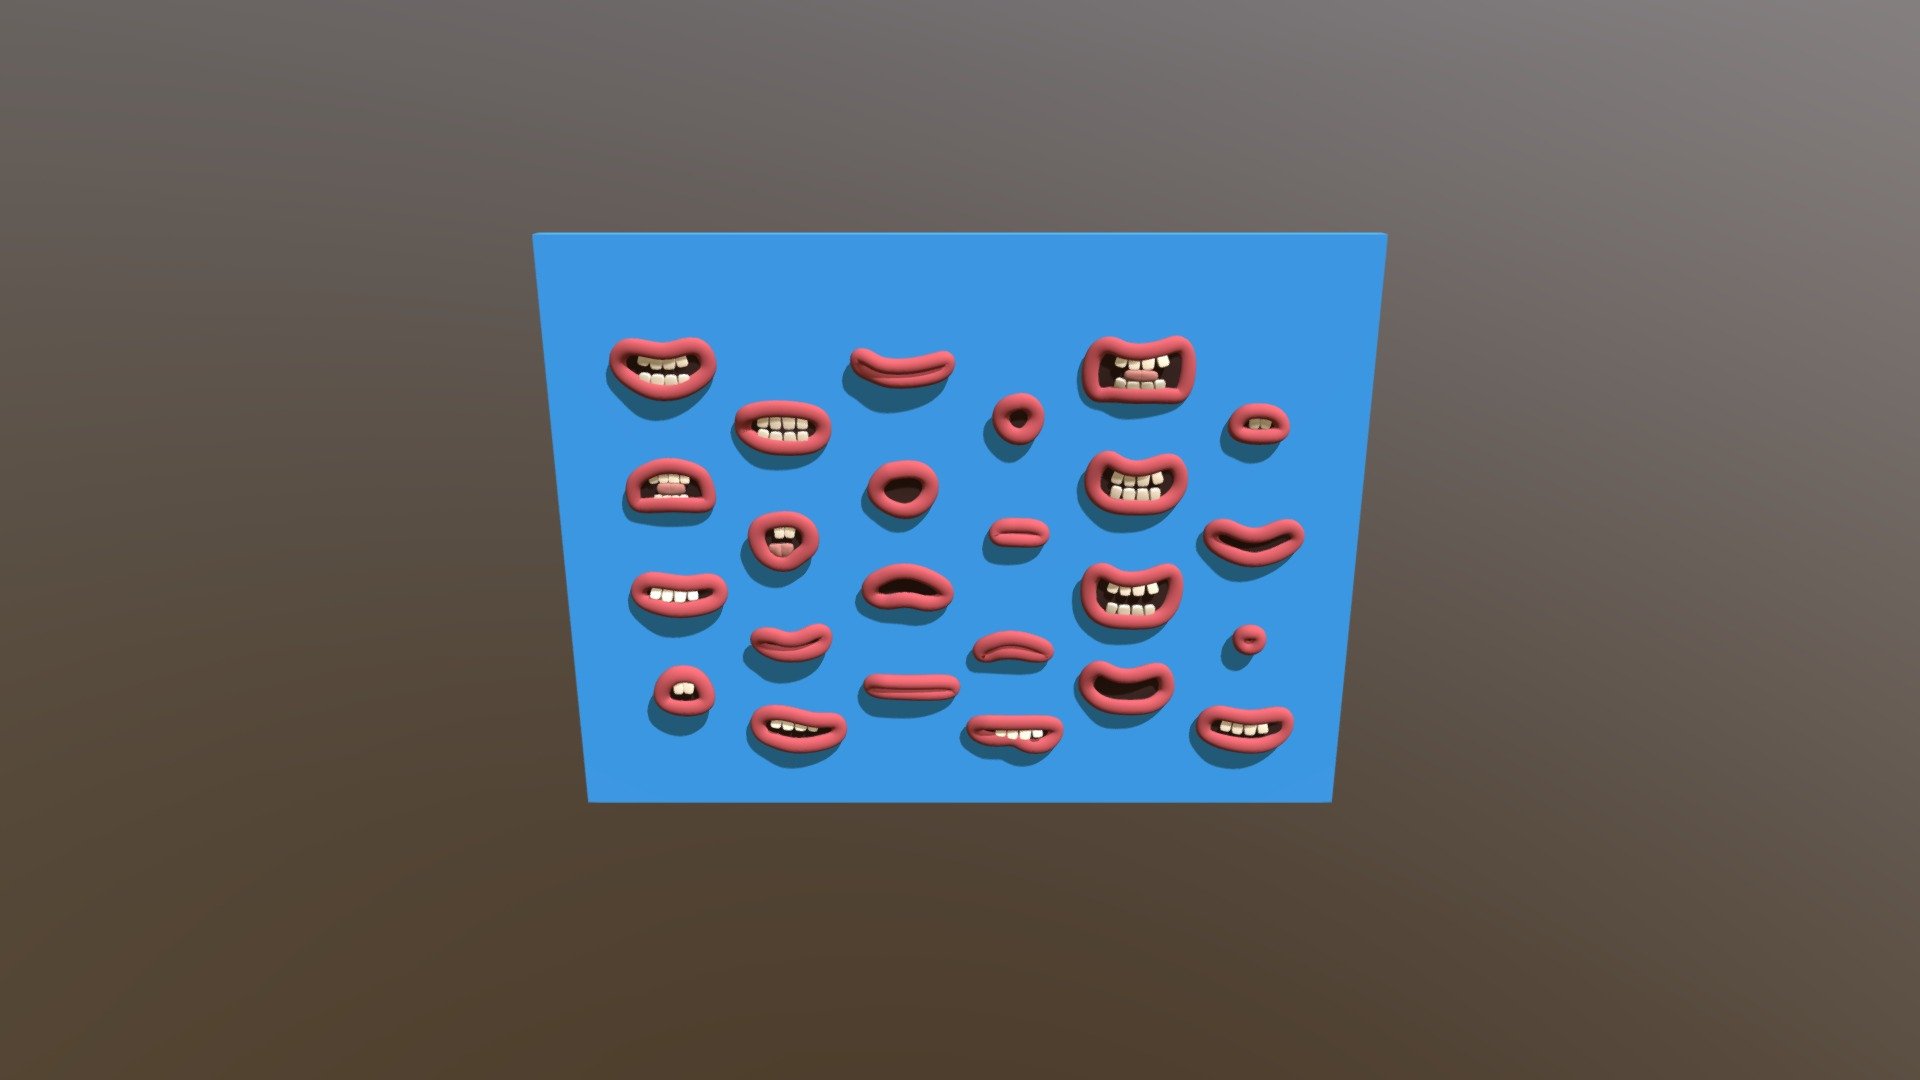 Working on Aardman-style claymation characters in Blender and created 25 default visemes for letters and emotions. 

Visemes are mouth-shapes created for animating dialogue and emotions. Thought might be useful for other animators as well 3d model